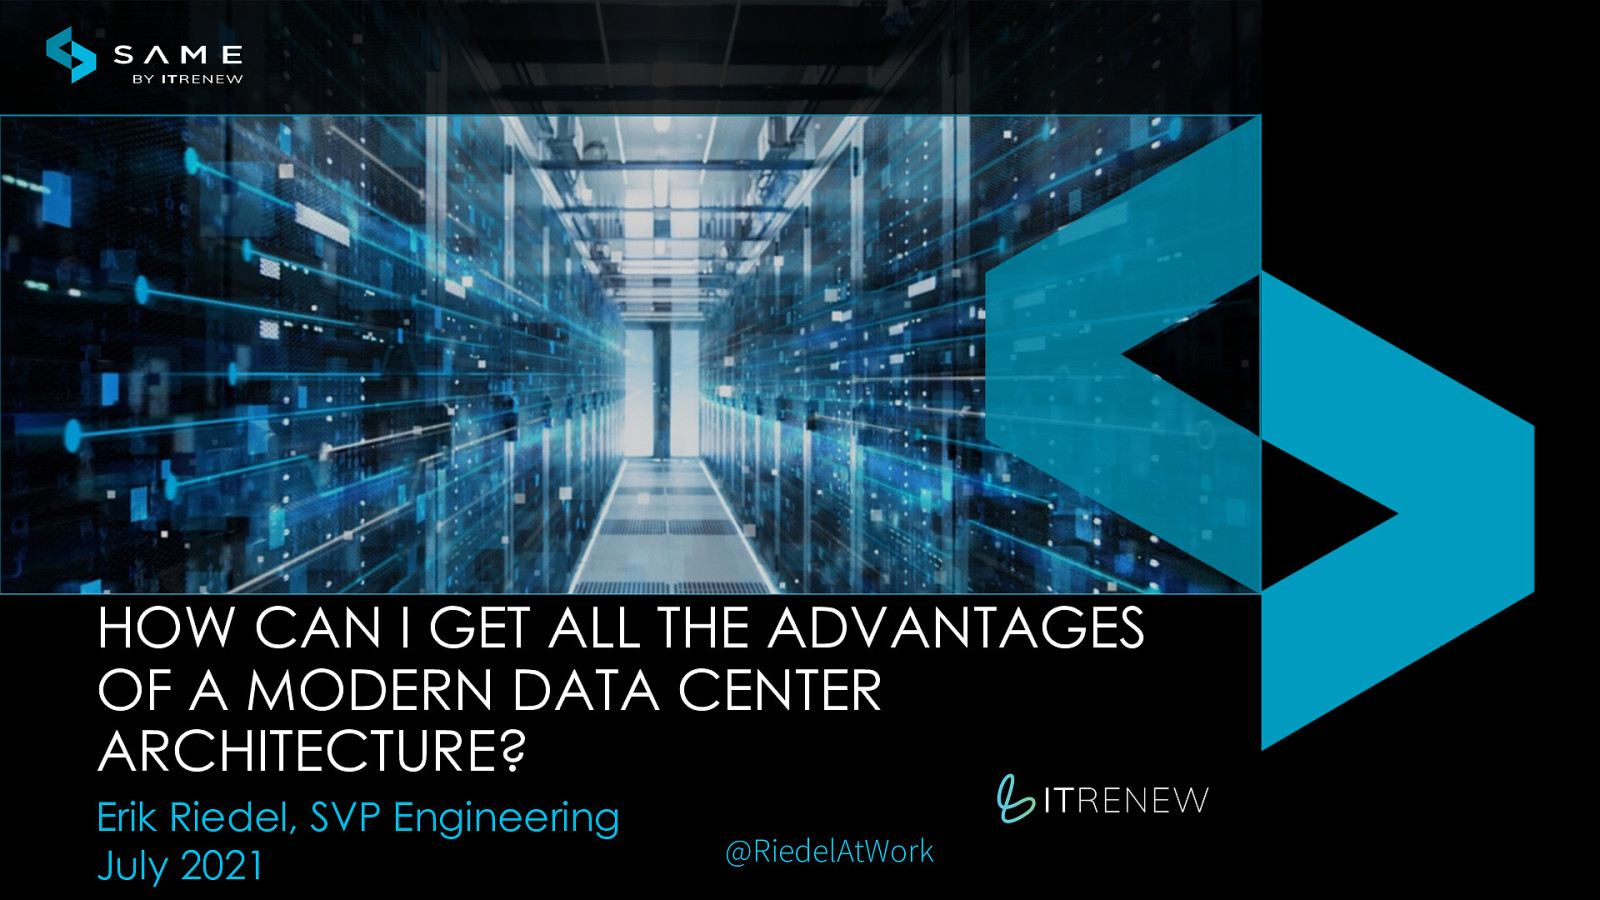 How Can I Get All the Advantages of a Modern Data Center Architecture?